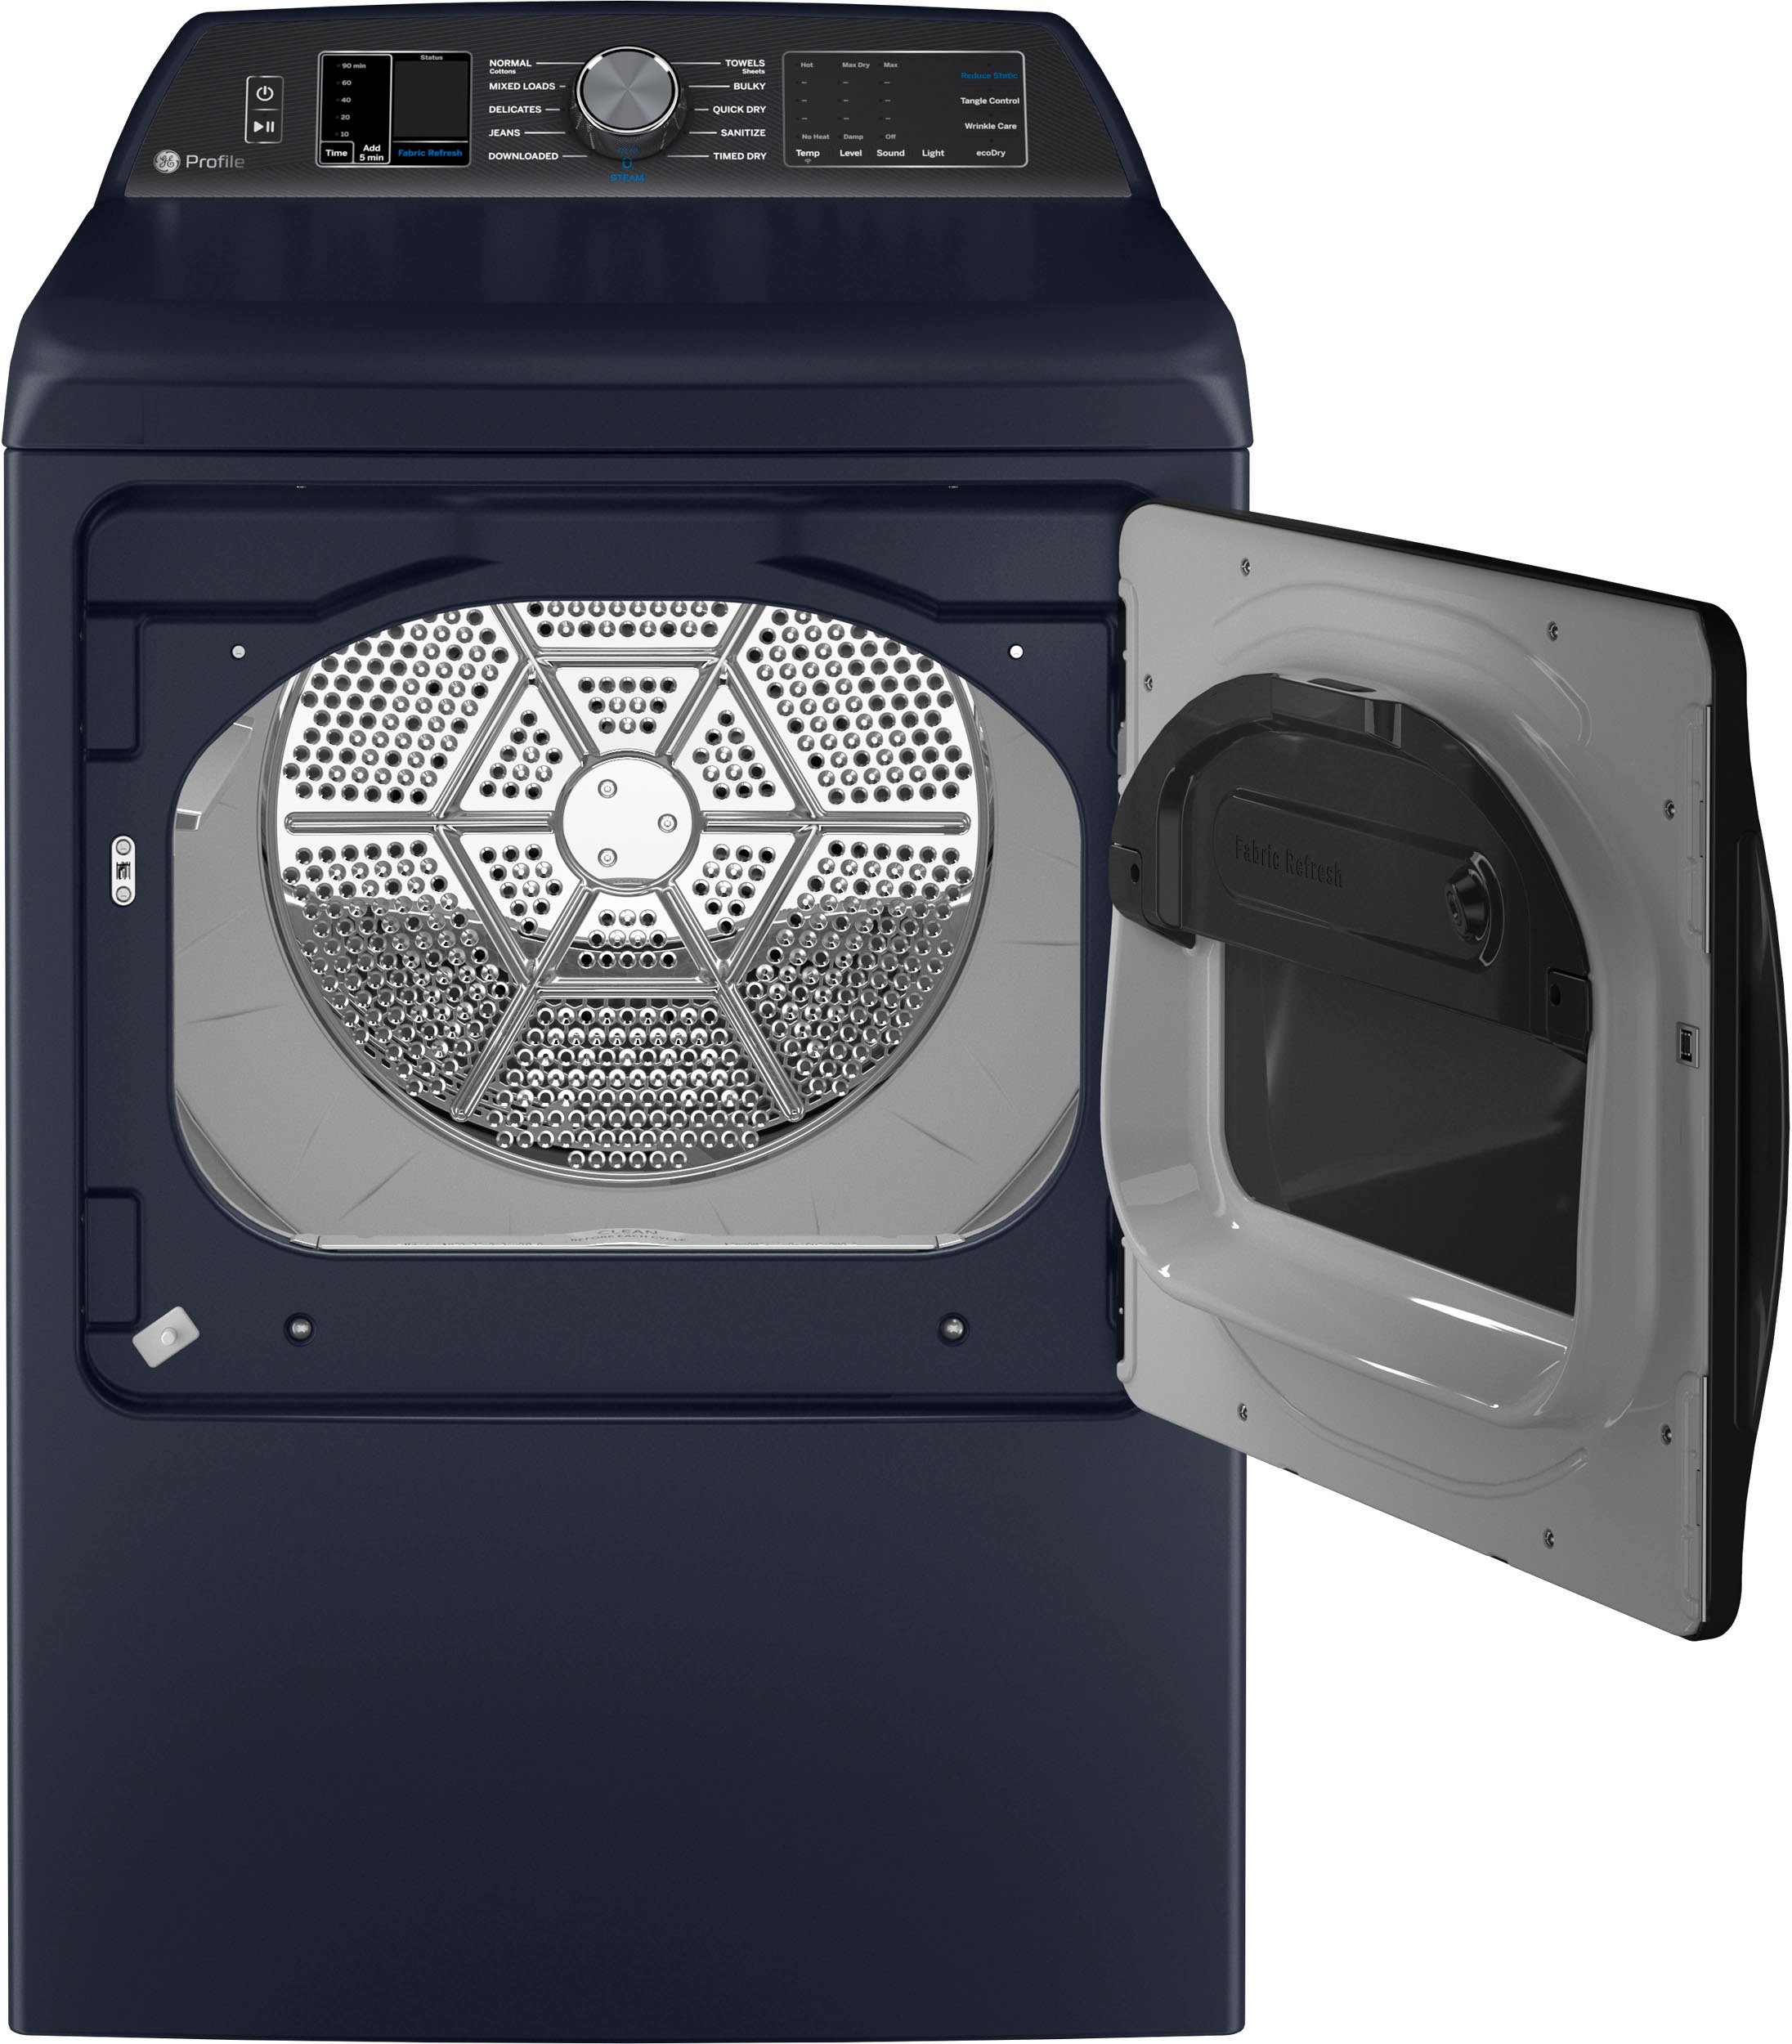 Angle View: GE Profile - 7.3 cu. ft. Smart Gas Dryer with Fabric Refresh, Steam, and Washer Link - Sapphire Blue